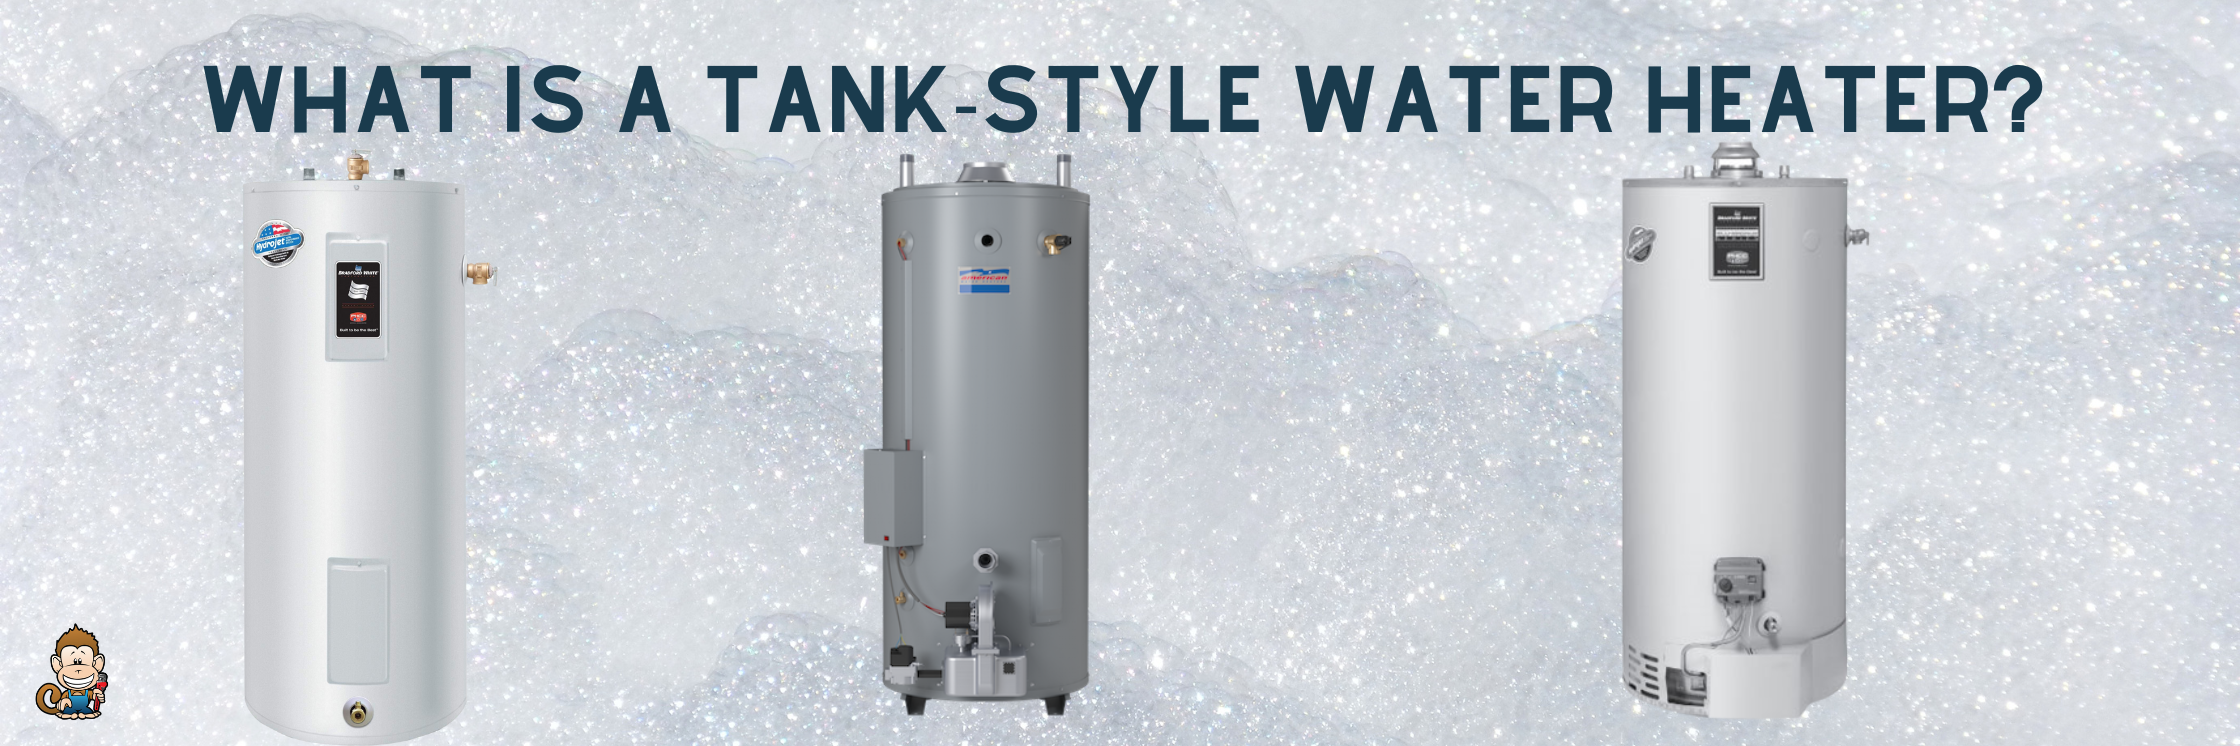 What is a Tank-Style Water Heater?